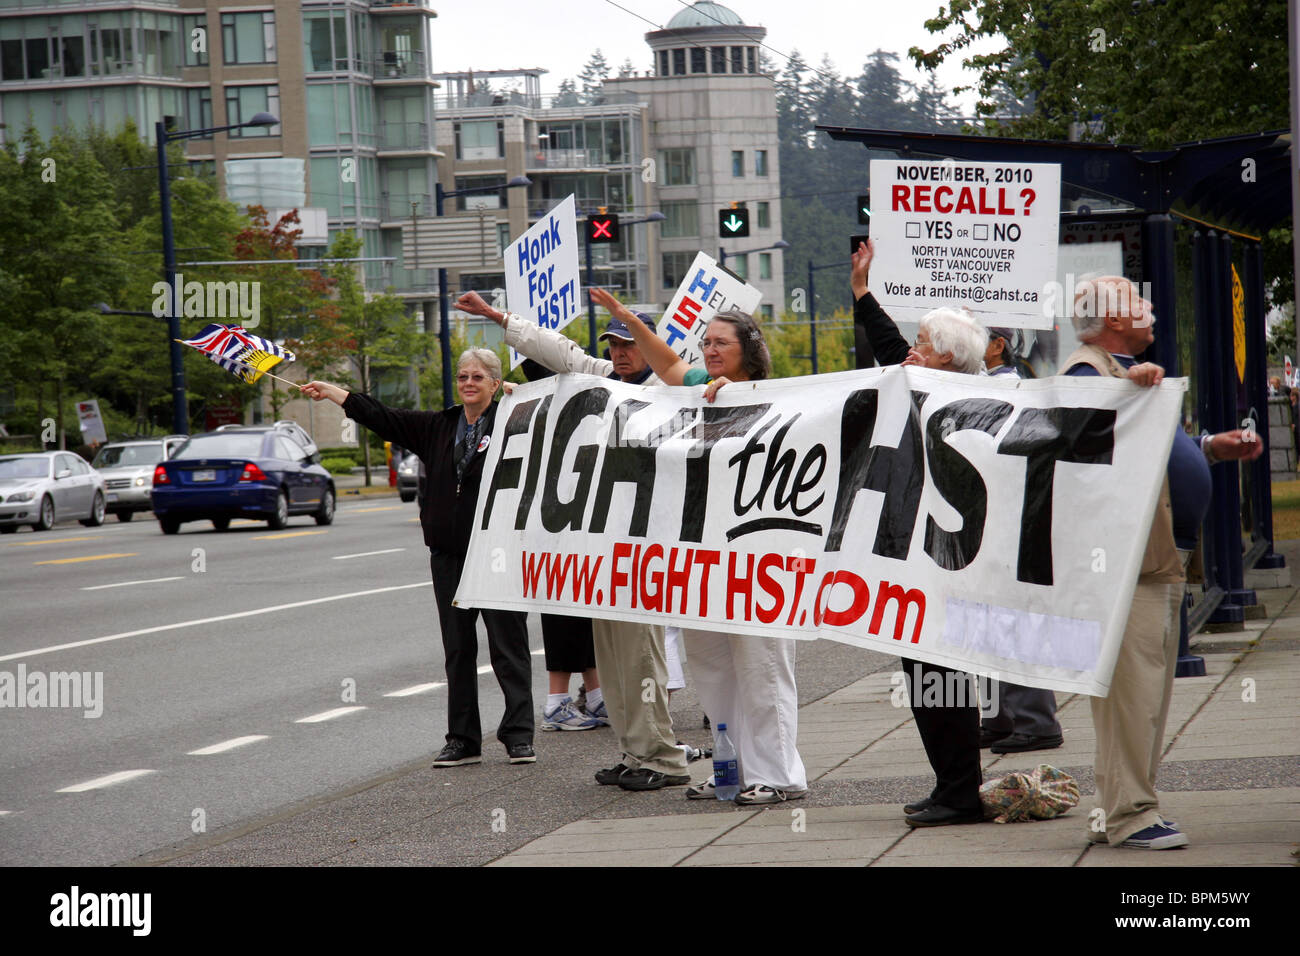 Protestors in Vancouver against a new HST tax introduced in British Columbia, Canada Stock Photo